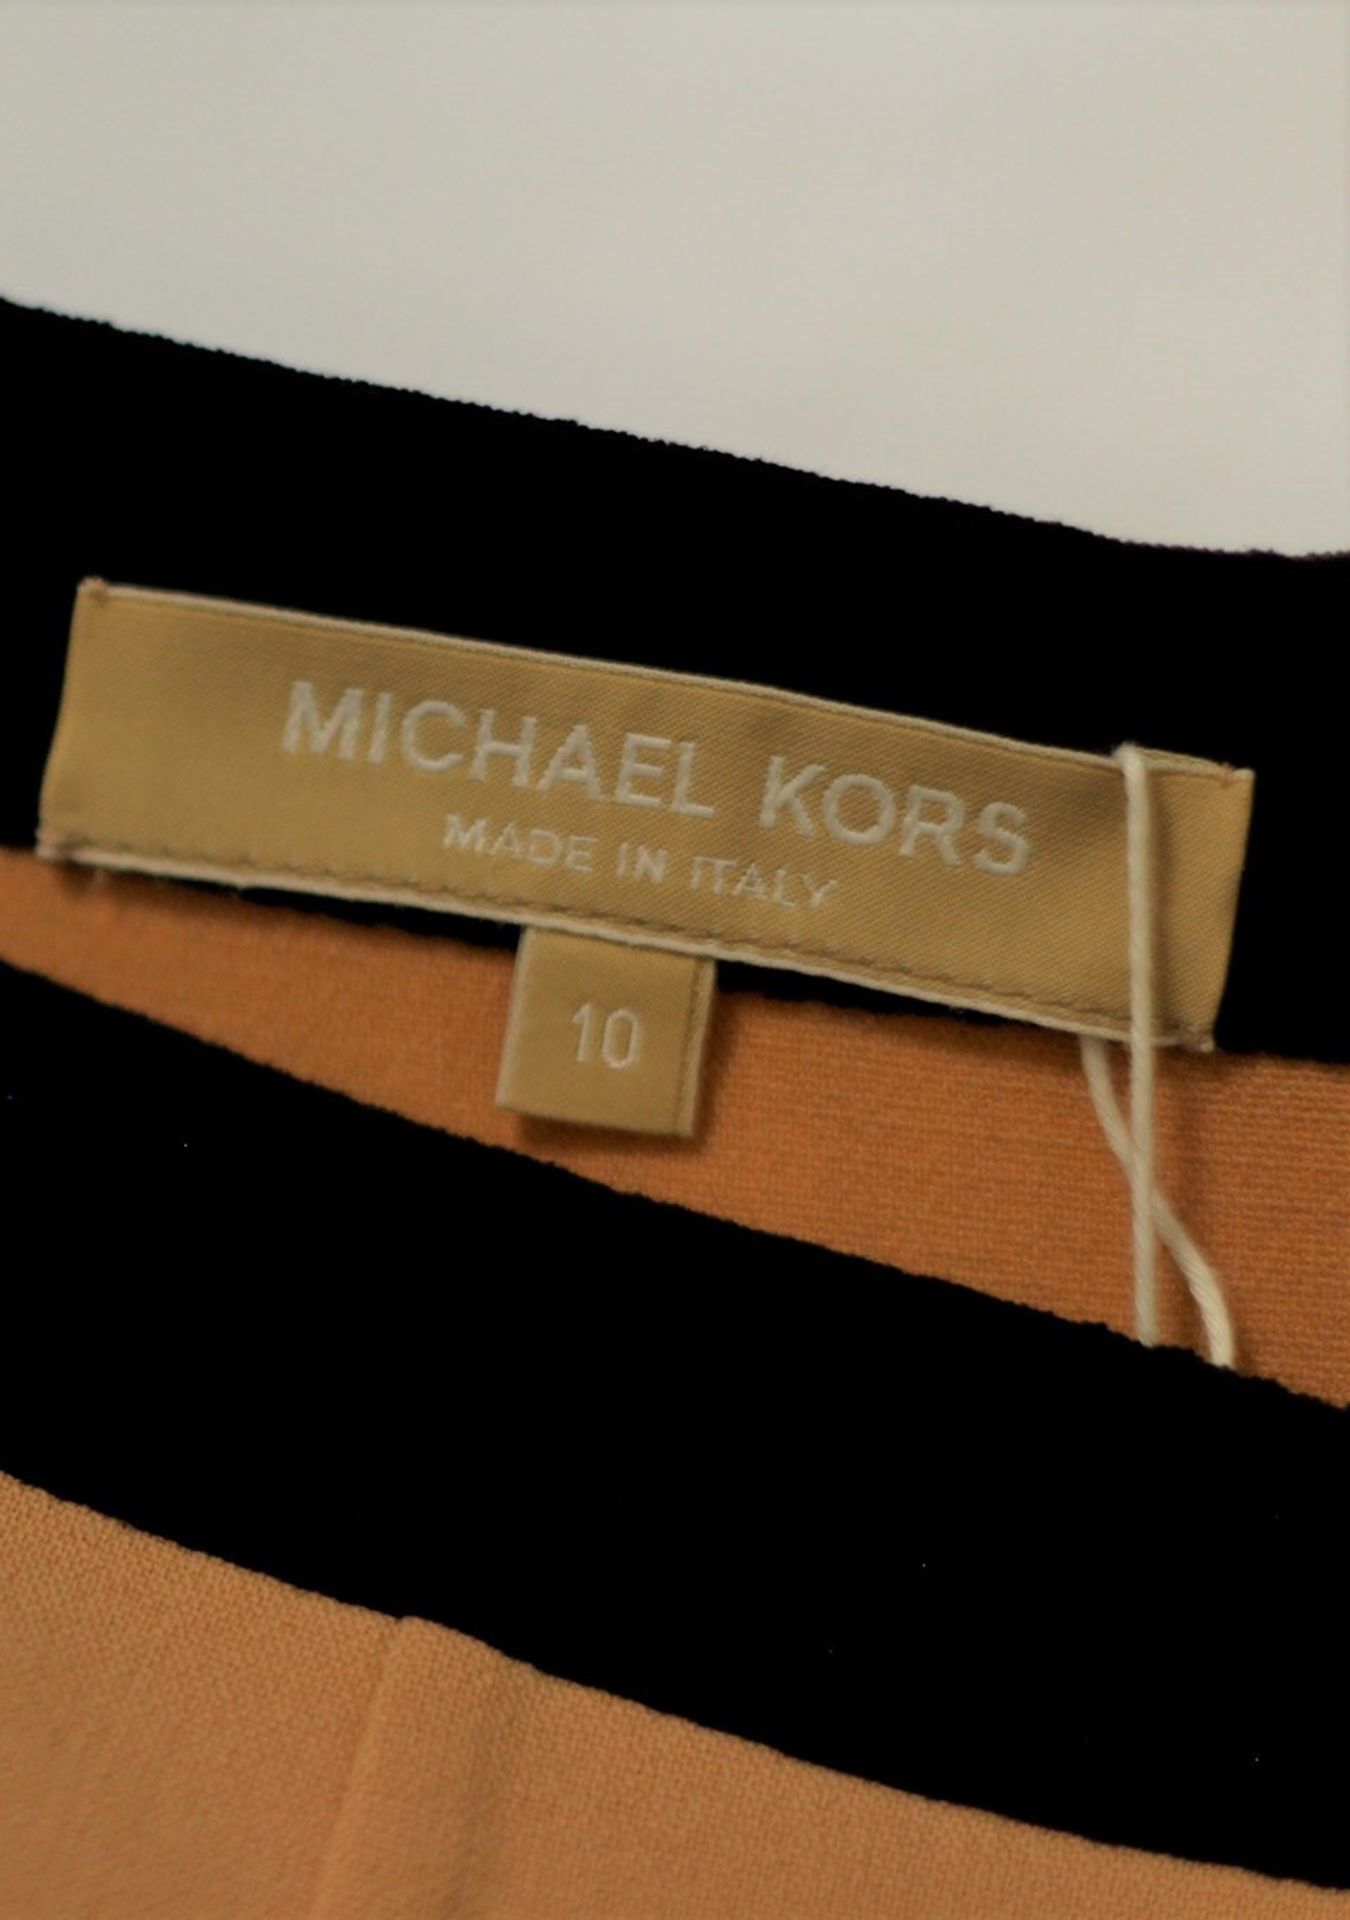 1 x Michael Kors Suntan And Black Skirt - Size: 14 - Material: 96% Virgin Wool, 4% Spandex - From - Image 2 of 7